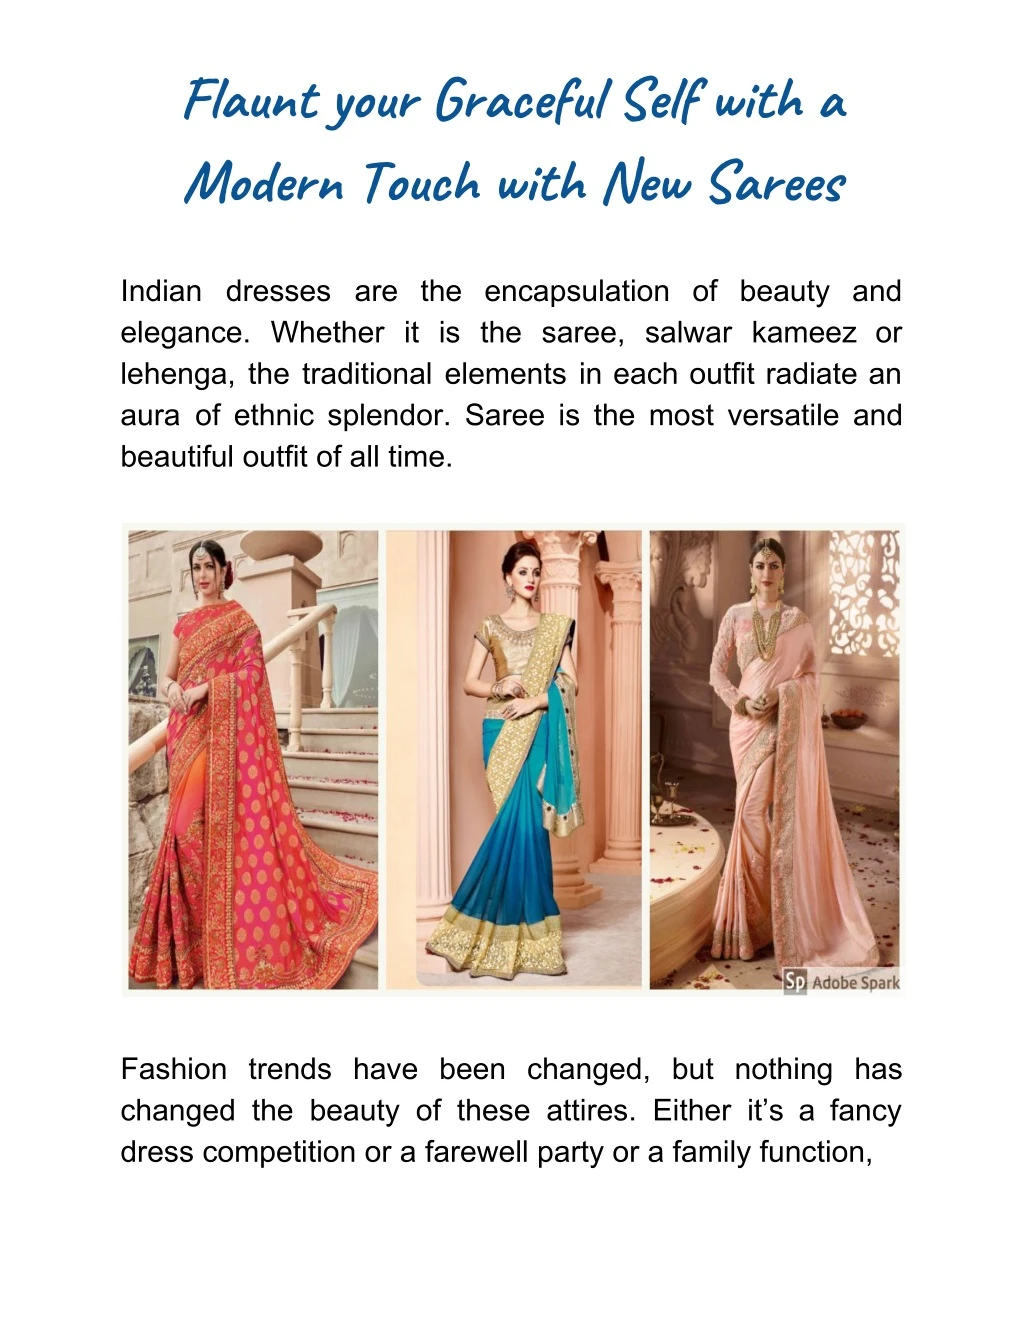 flaunt your graceful self with a modern touch